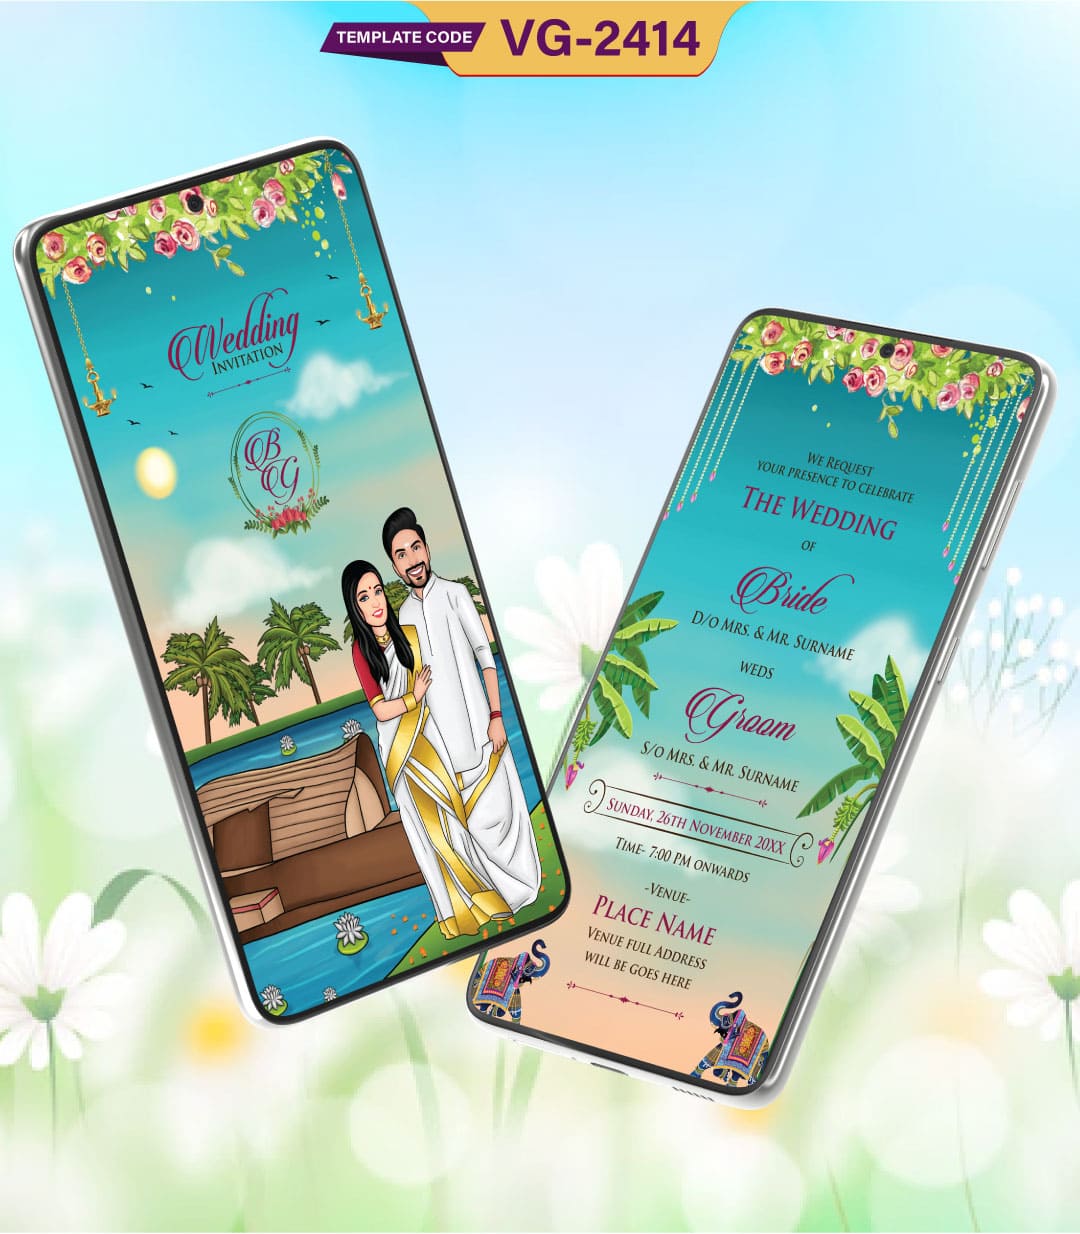 South Indian Caricature Wedding Templates